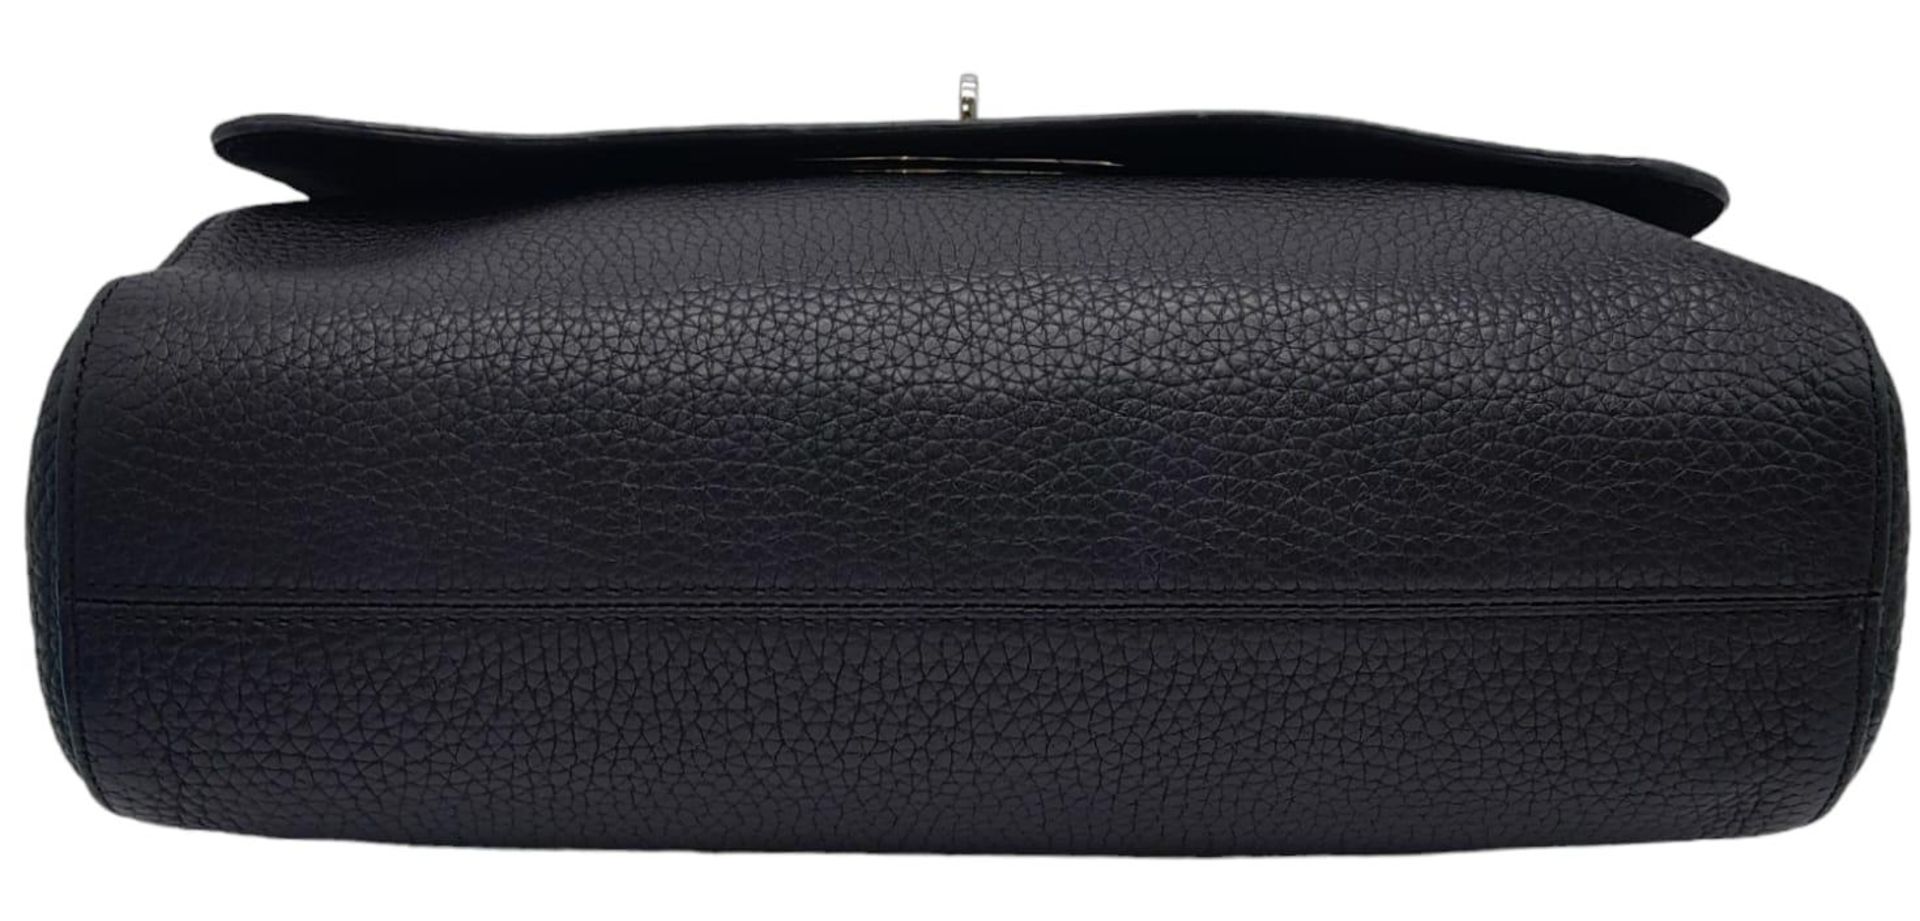 A Mulberry Black 'Lily' Bag. Leather exterior with gold-toned hardware, chain and leather strap, - Image 4 of 12